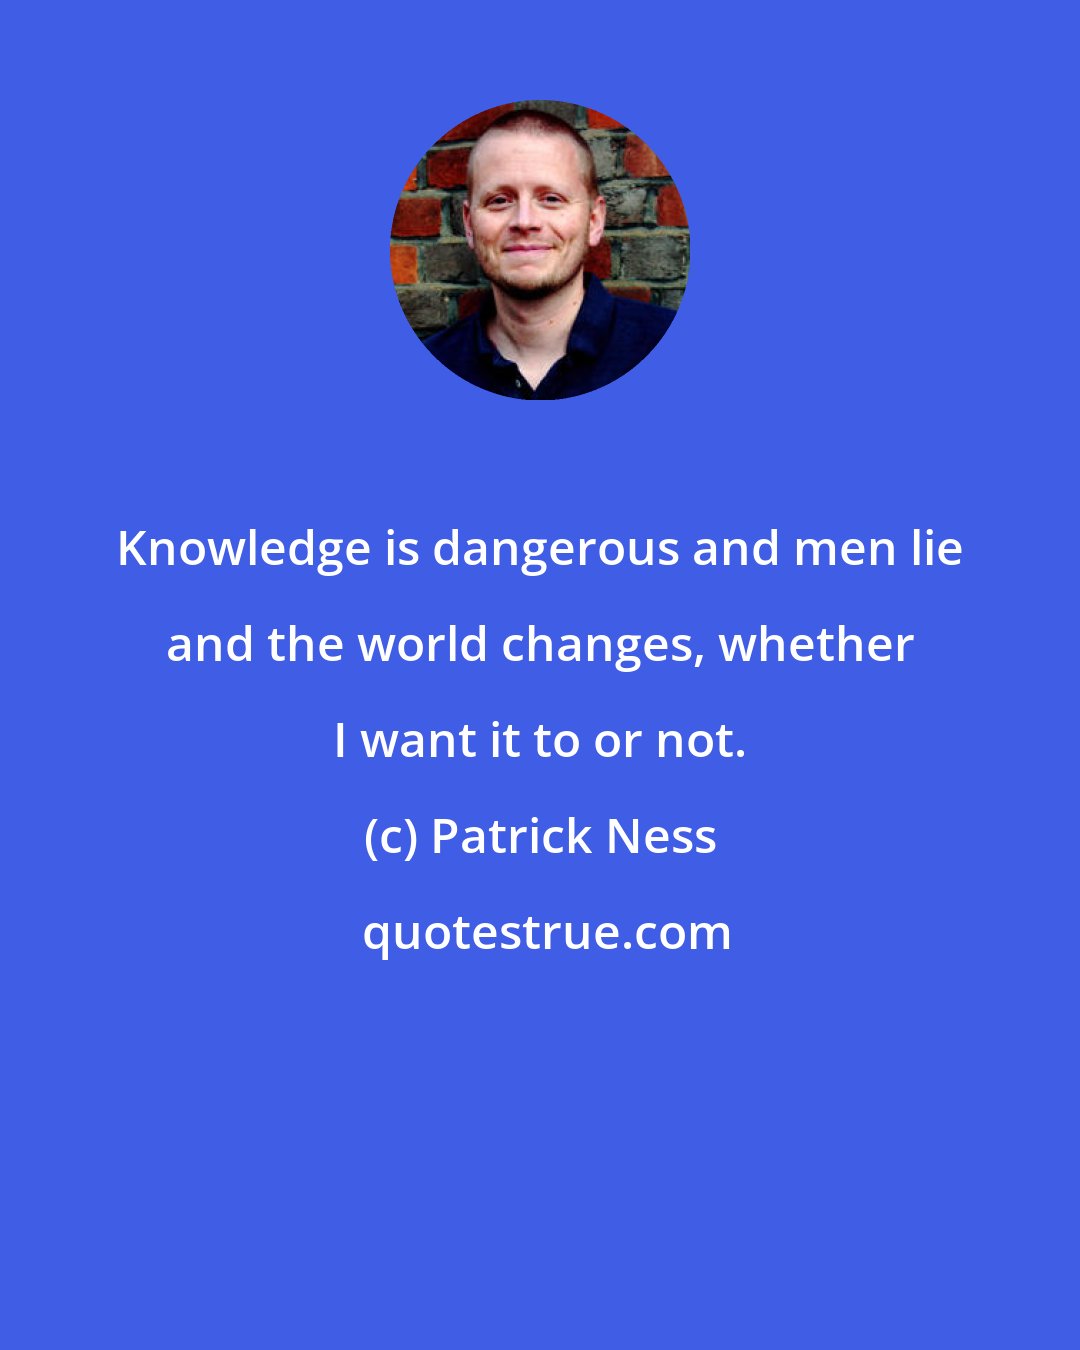 Patrick Ness: Knowledge is dangerous and men lie and the world changes, whether I want it to or not.